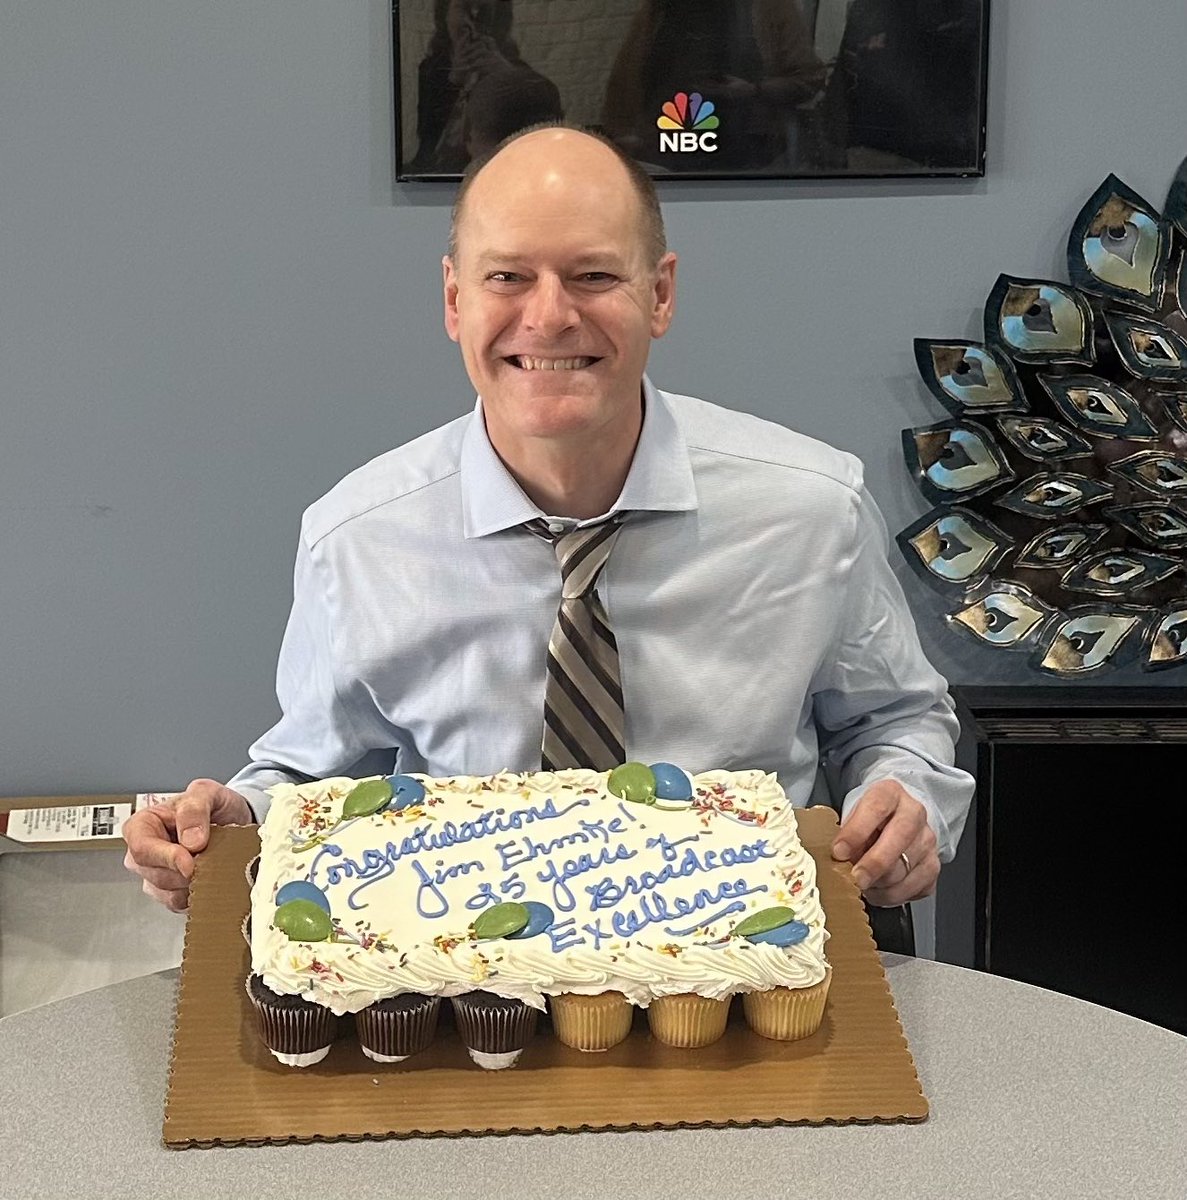 Congratulations to News Director, Jim Ehmke at @NewsChannel34 for 25 years of quality storytelling.